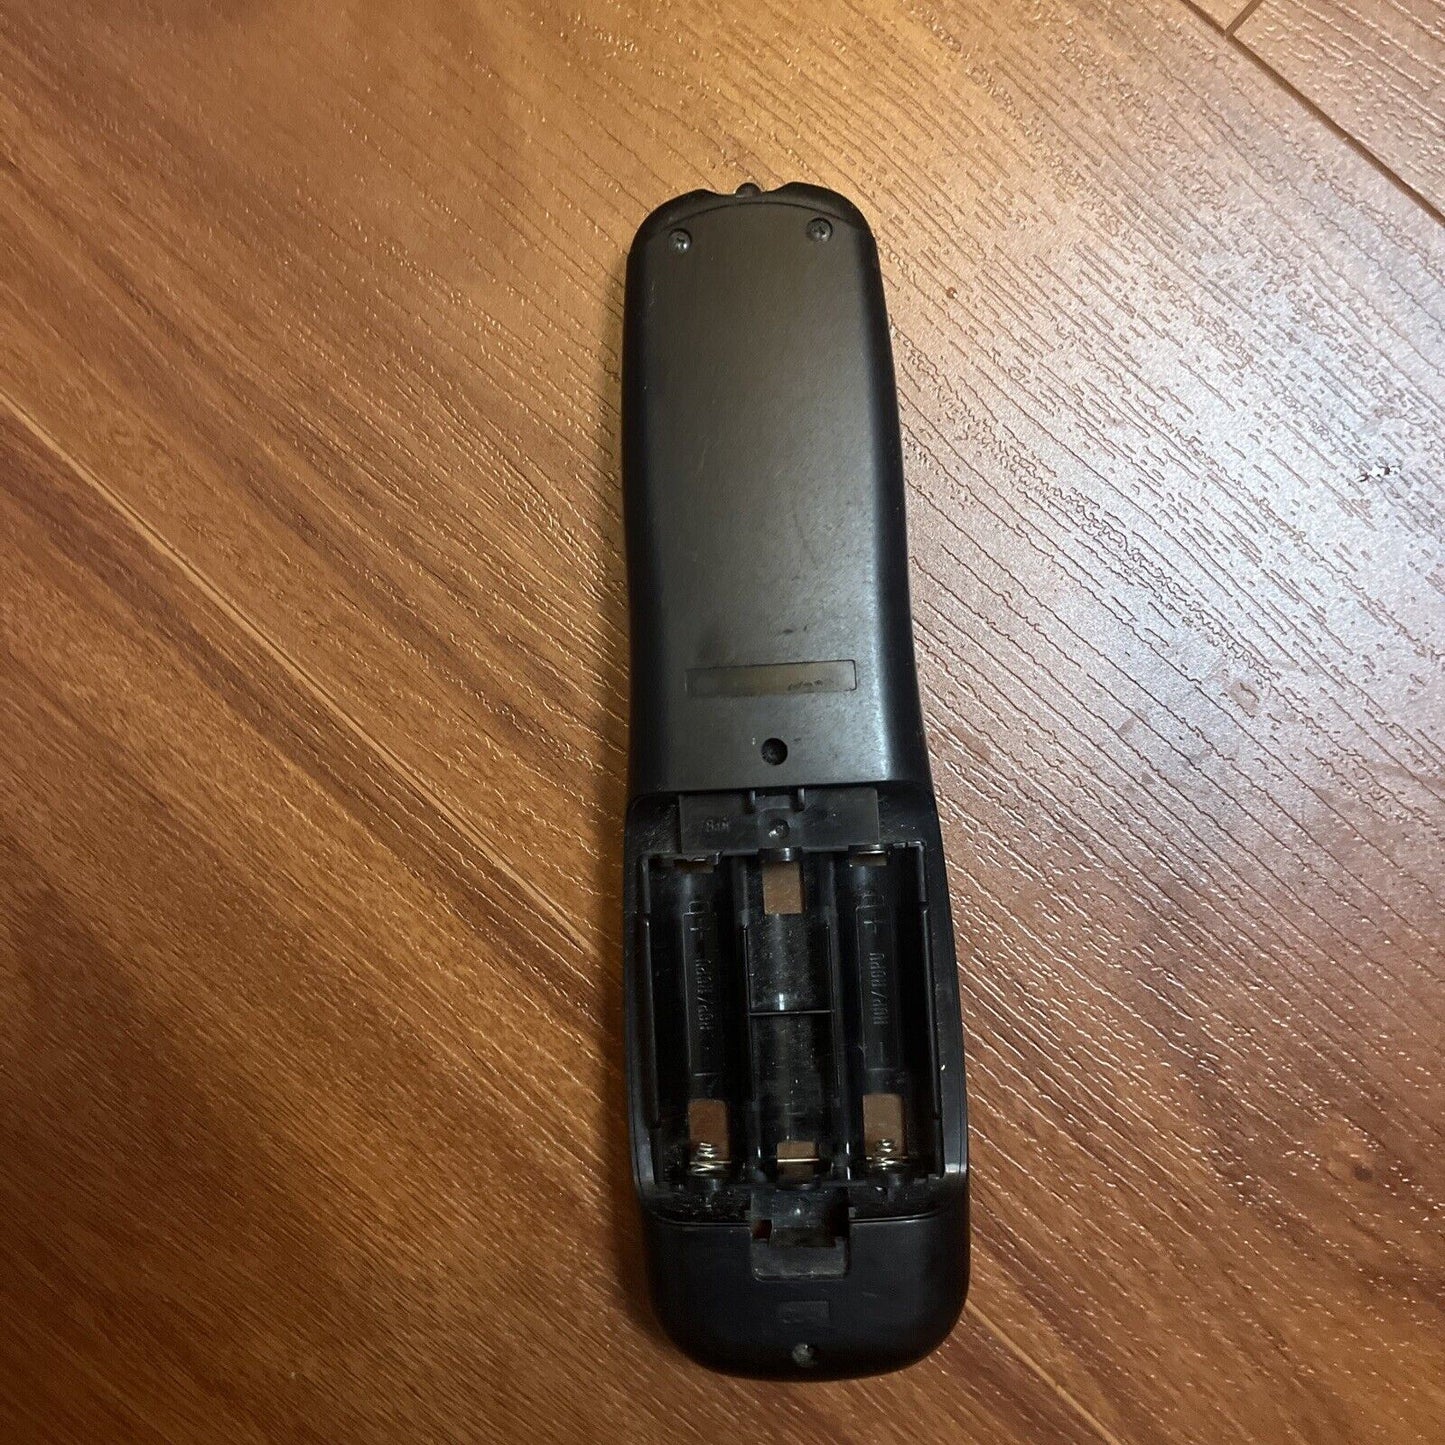 Genuine Philips Remote Control for TV VCR *Missing Battery Cover*